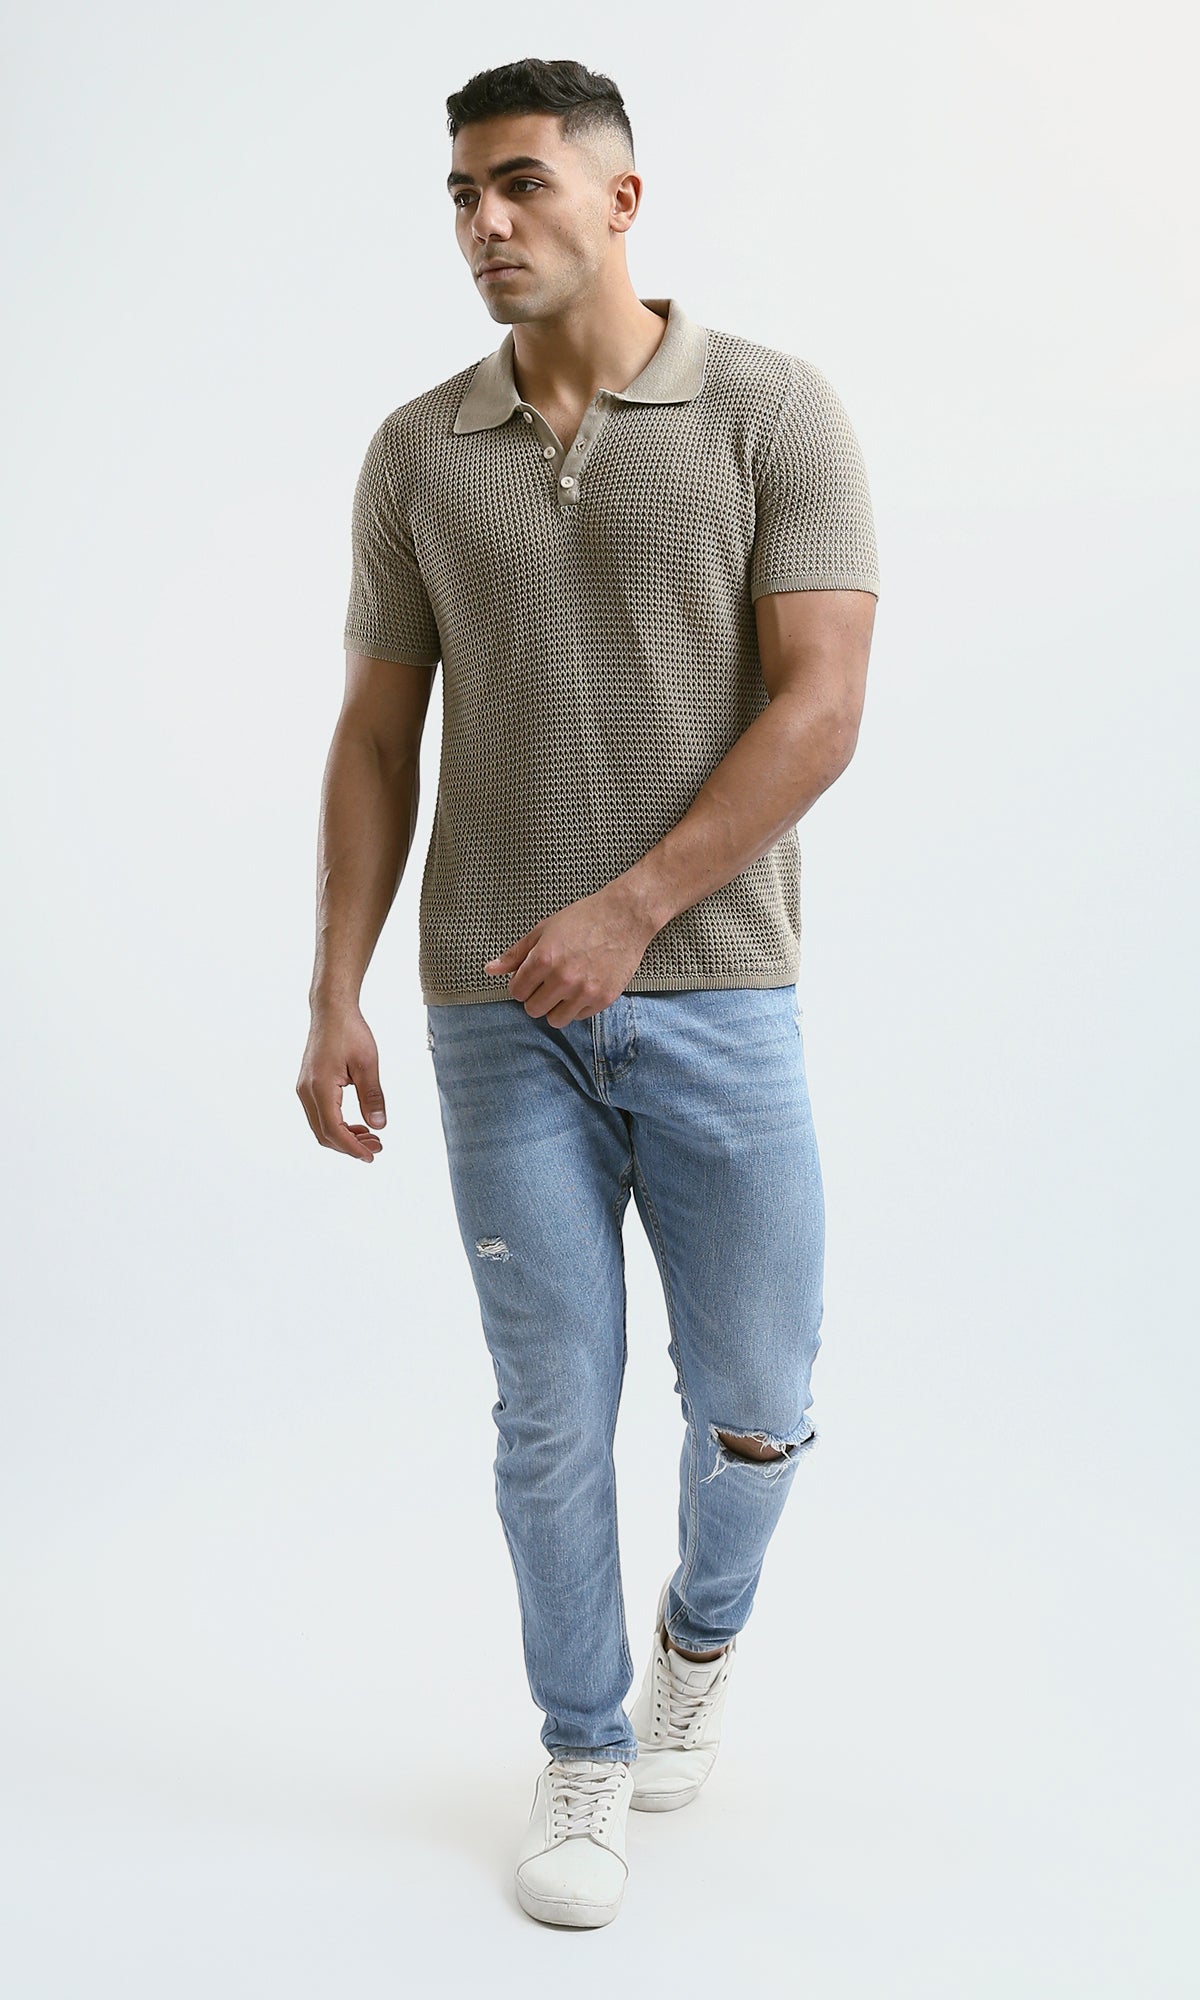 O182758 Buttoned Neck Dark Beige Knitted Polo Shirt